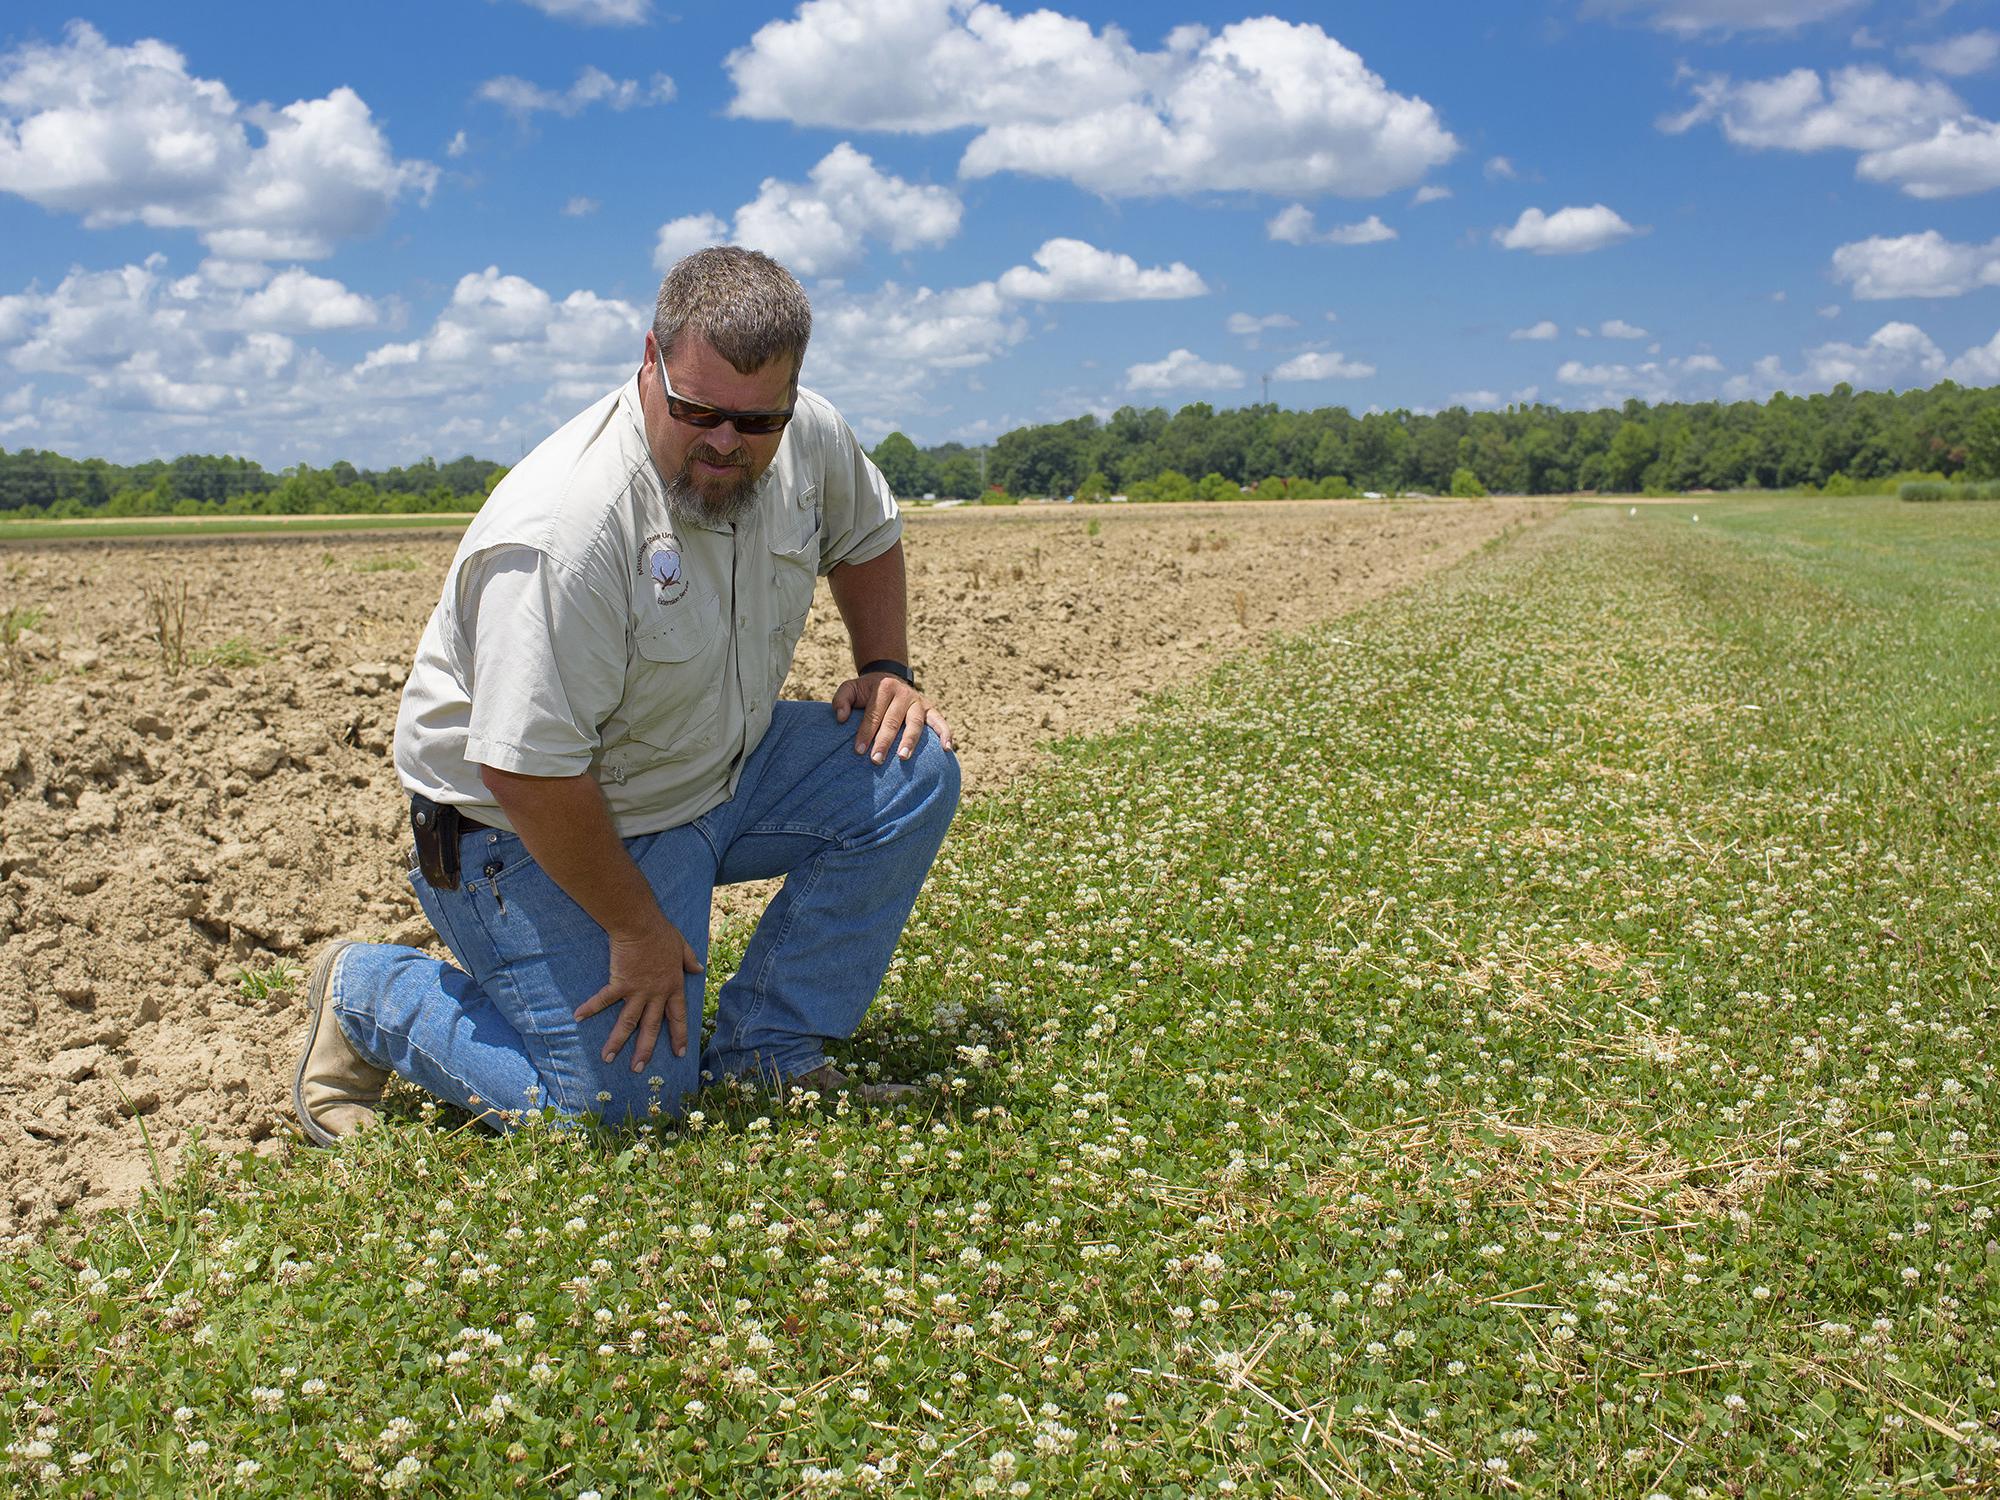 What looks like weeds to a farmer or landowner is forage for pollinators such as honeybees. Angus Catchot and other researchers at Mississippi State University are part of efforts to find management plans that balance competing needs. (Photo by MSU Extension Service/Kevin Hudson)